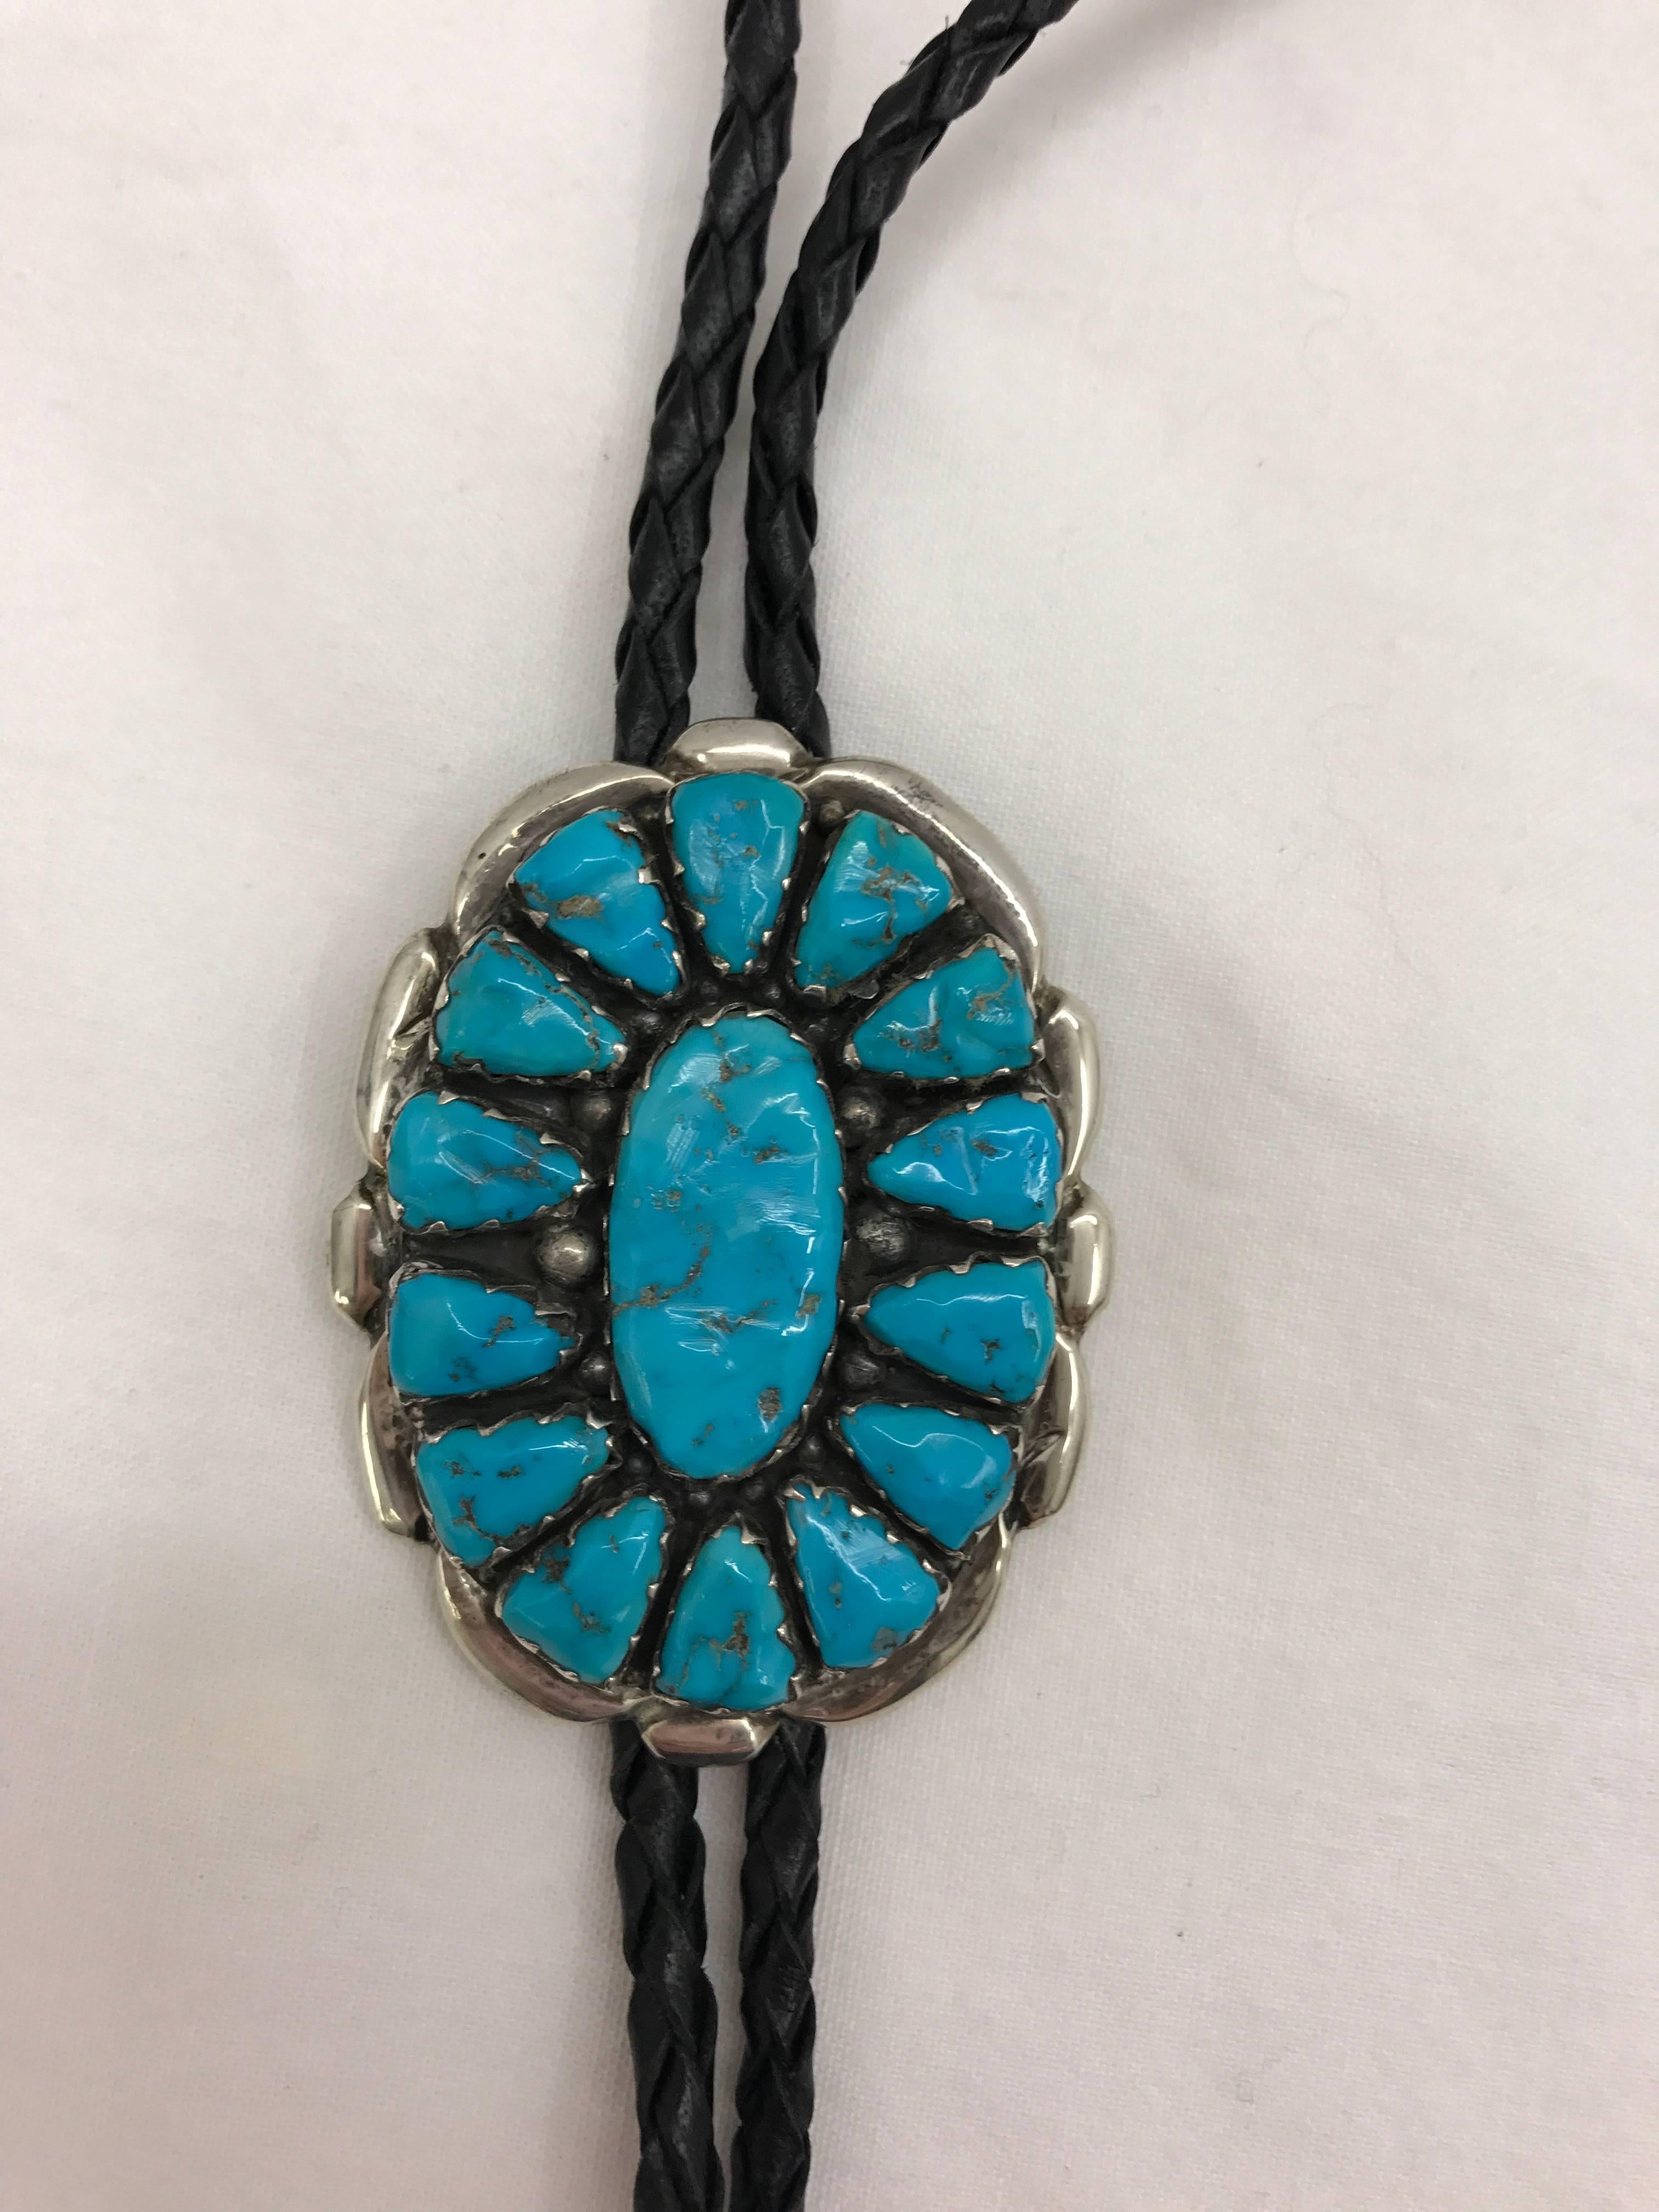 Vintage Navajo Indian blue turquoise and silver bolo tie or lariat by Alvina Quam Zuni from the 1960s. Signed on reverse.